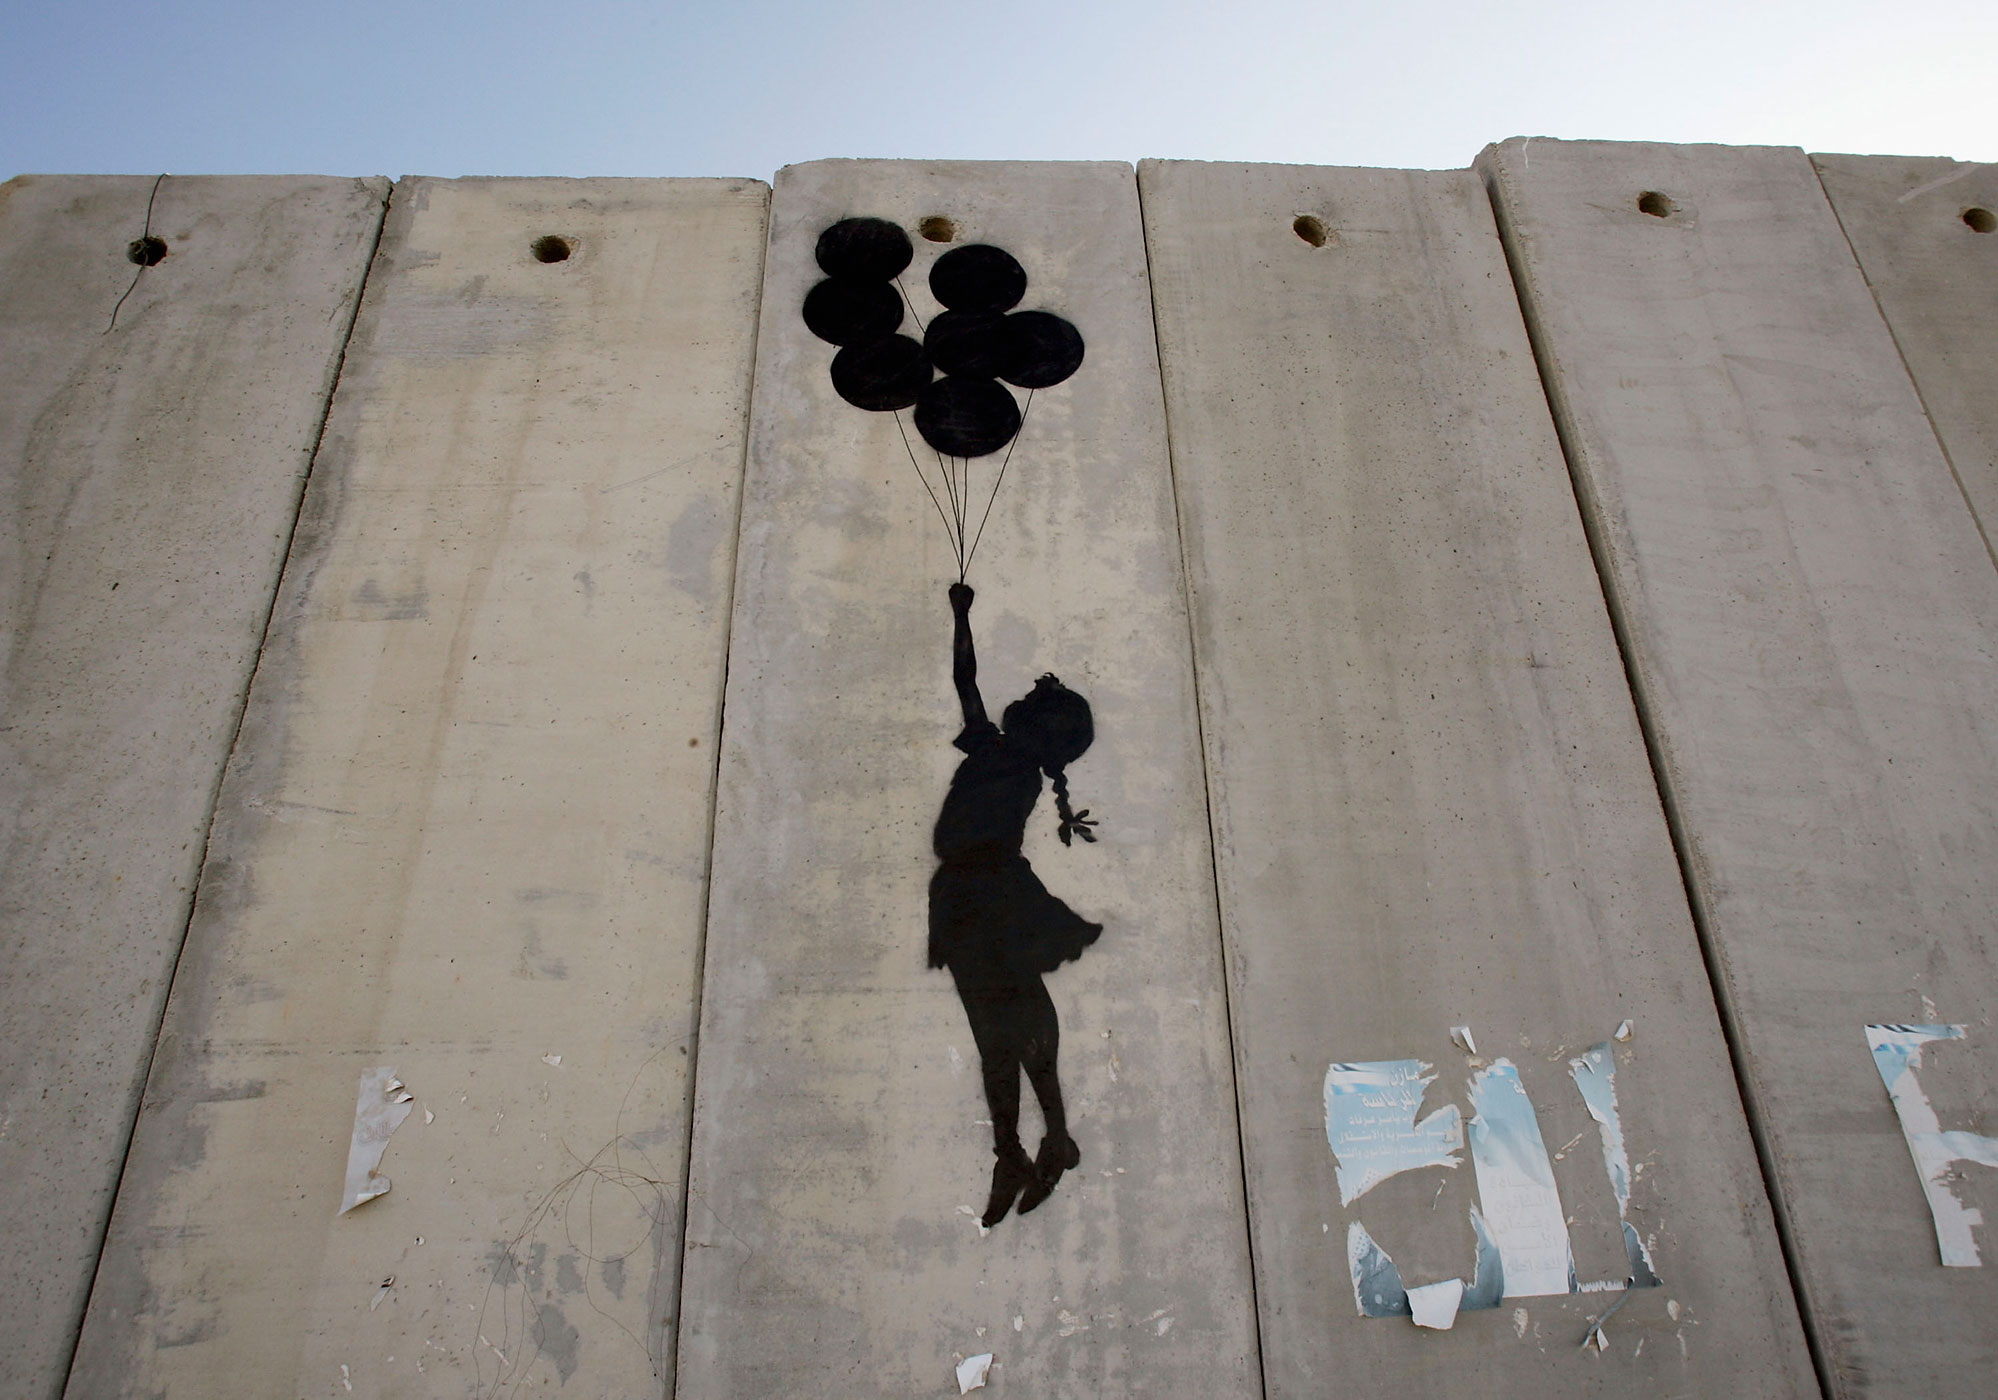 A graffiti titled  Balloon Debate  made by Banksy is seen on Israel's highly controversial West Bank barrier in Ramallah on August 6, 2005.